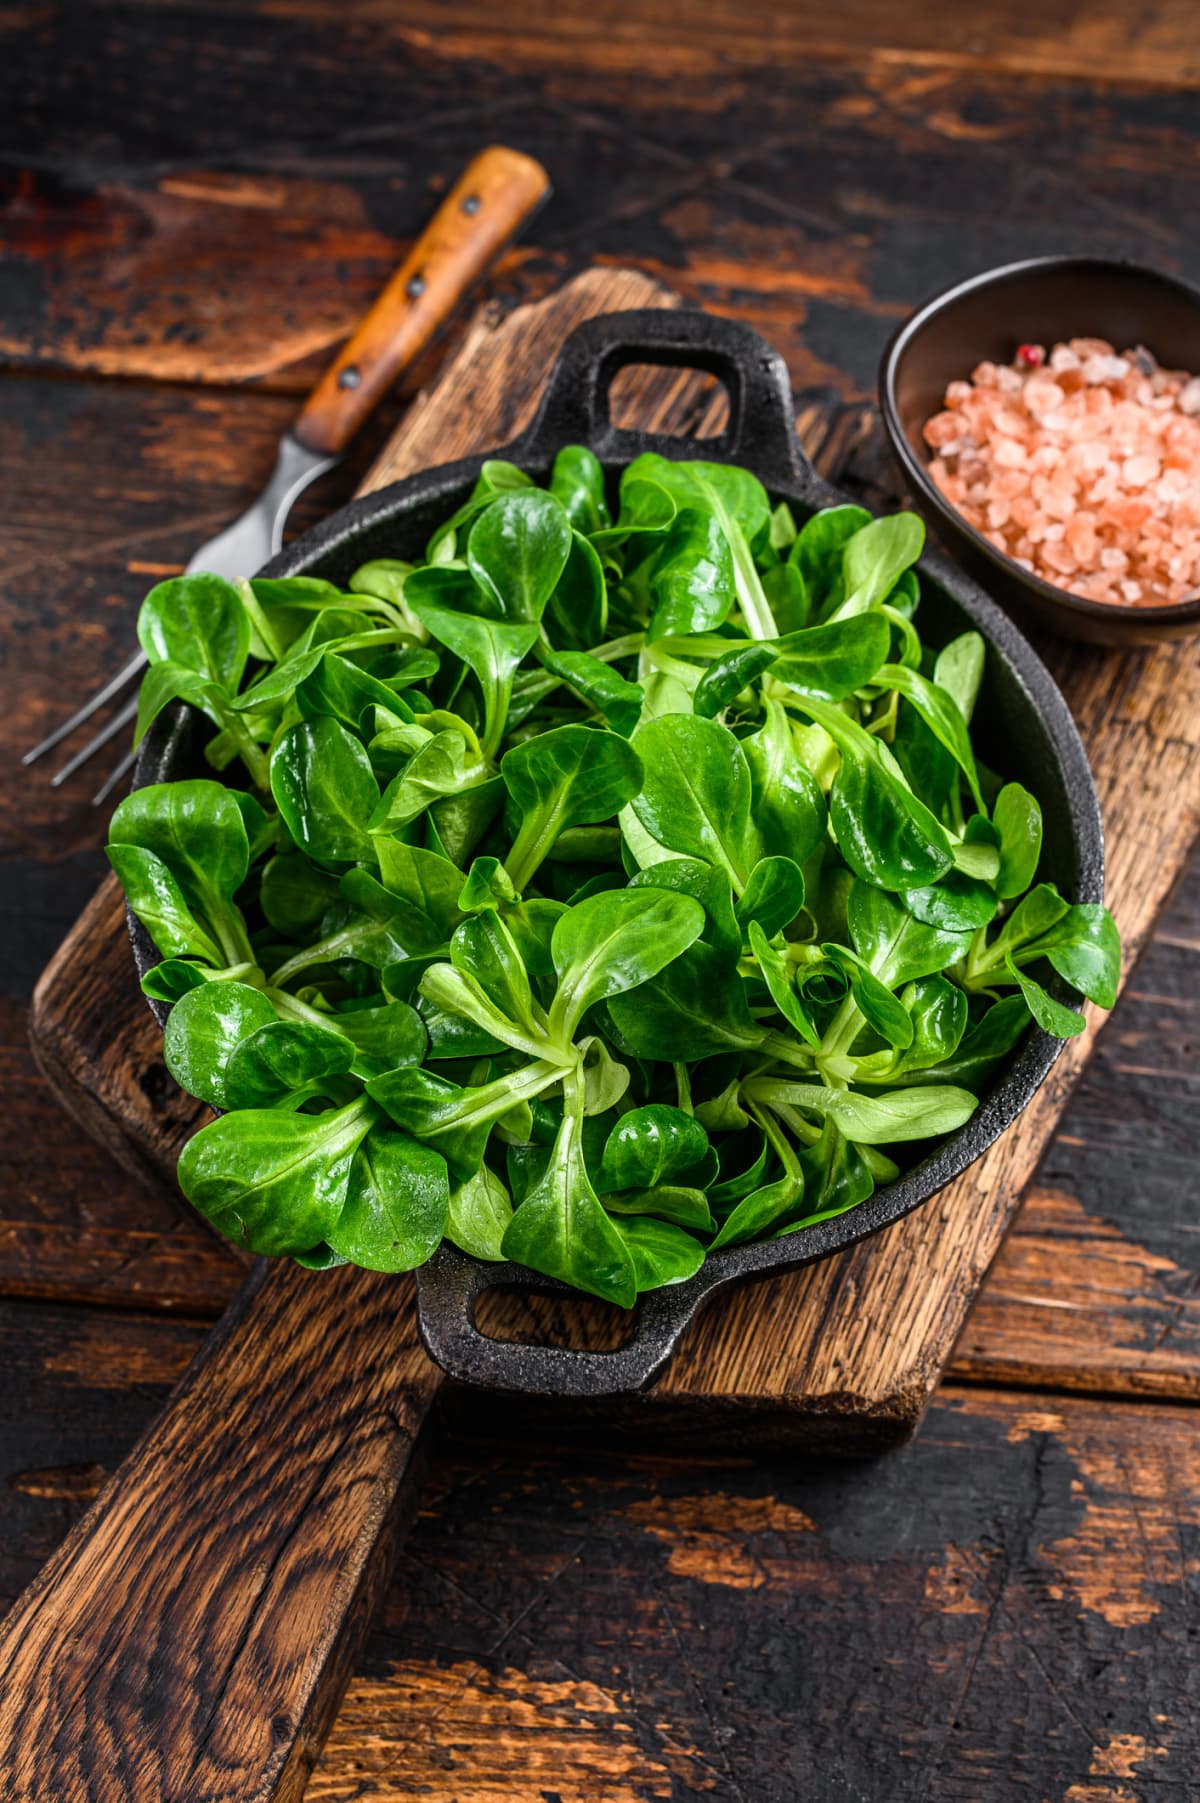 Fresh Raw green lambs lettuce Corn salad leaves in a pan. Dark wooden background. Top view.